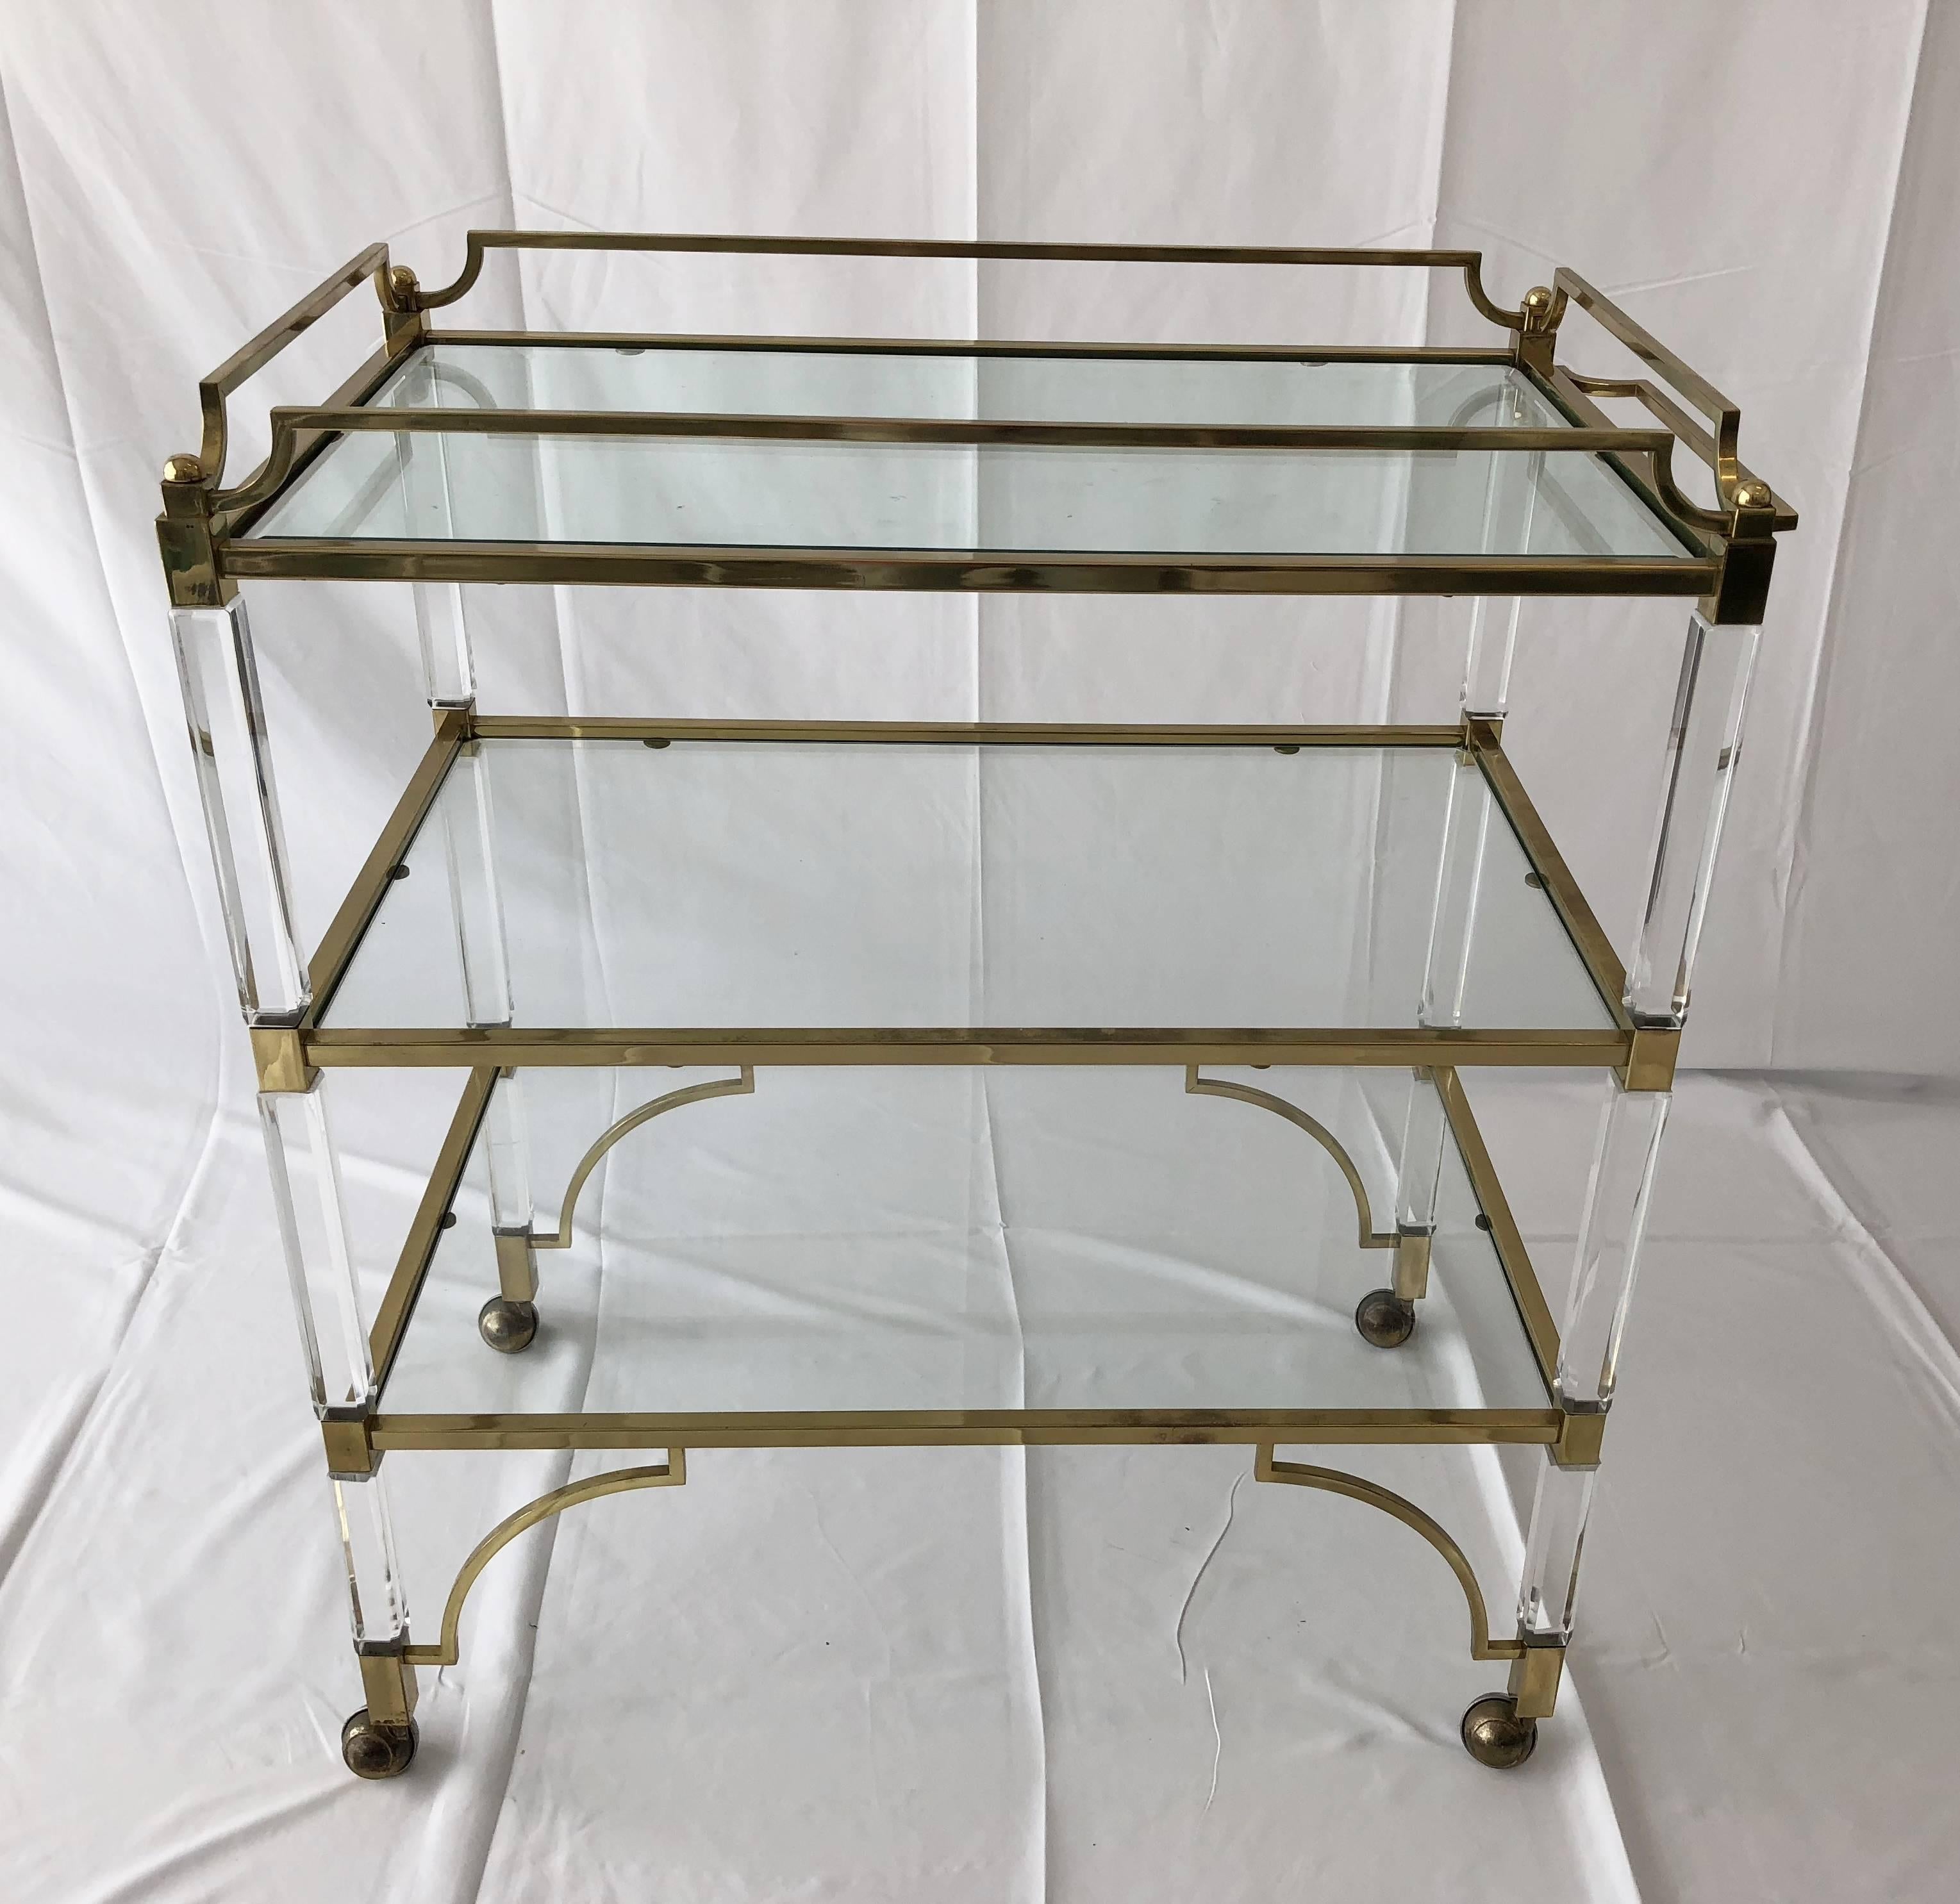 Beautiful and rare Lucite and brass serving/bar cart designed by Charles Hollis Jones and manufactured by Swedlow in the early 1960s, this piece is part of the 